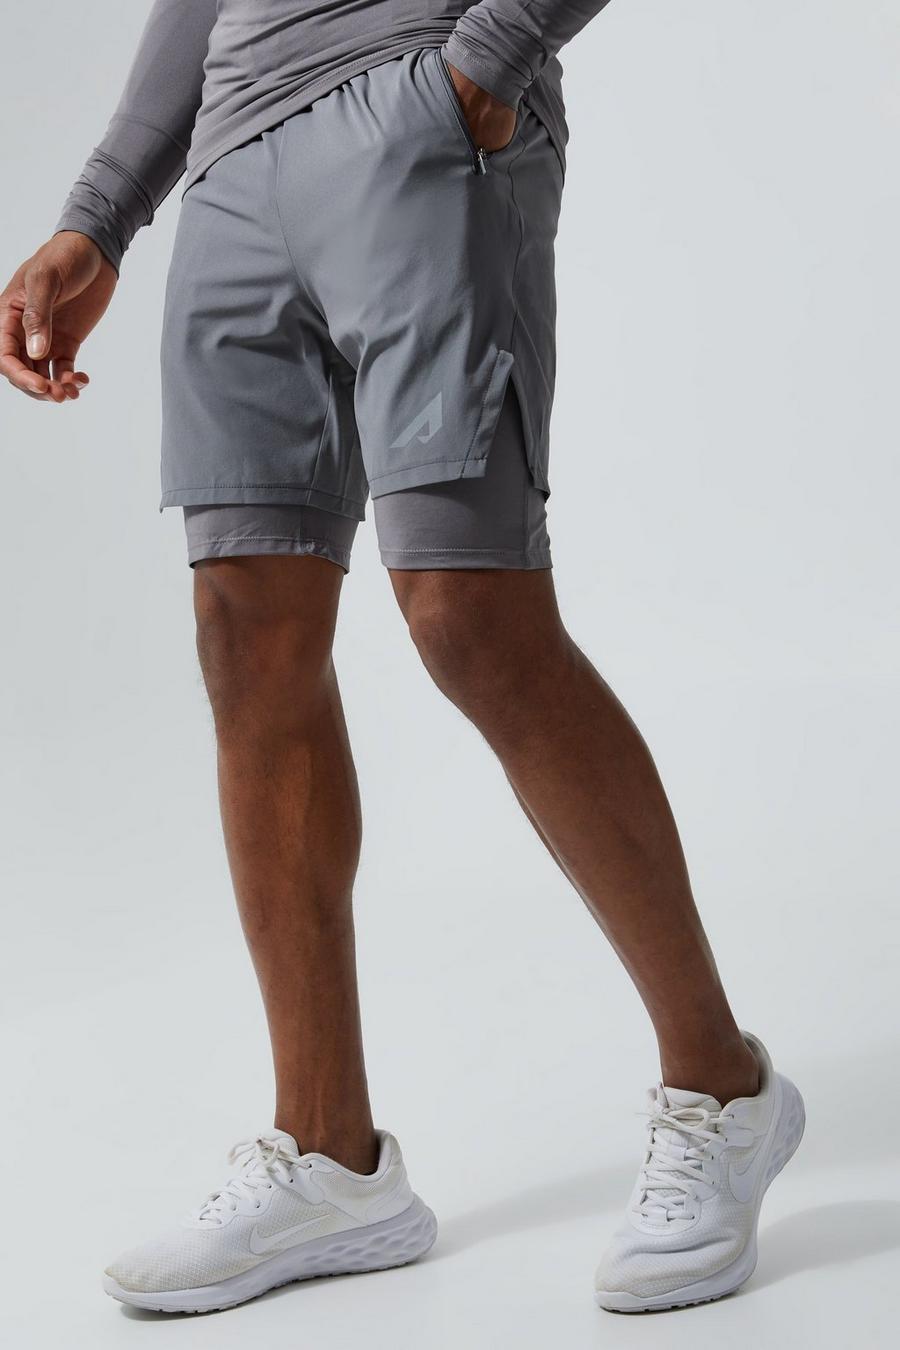 Charcoal grey Active 2 In 1 Reflective Shorts